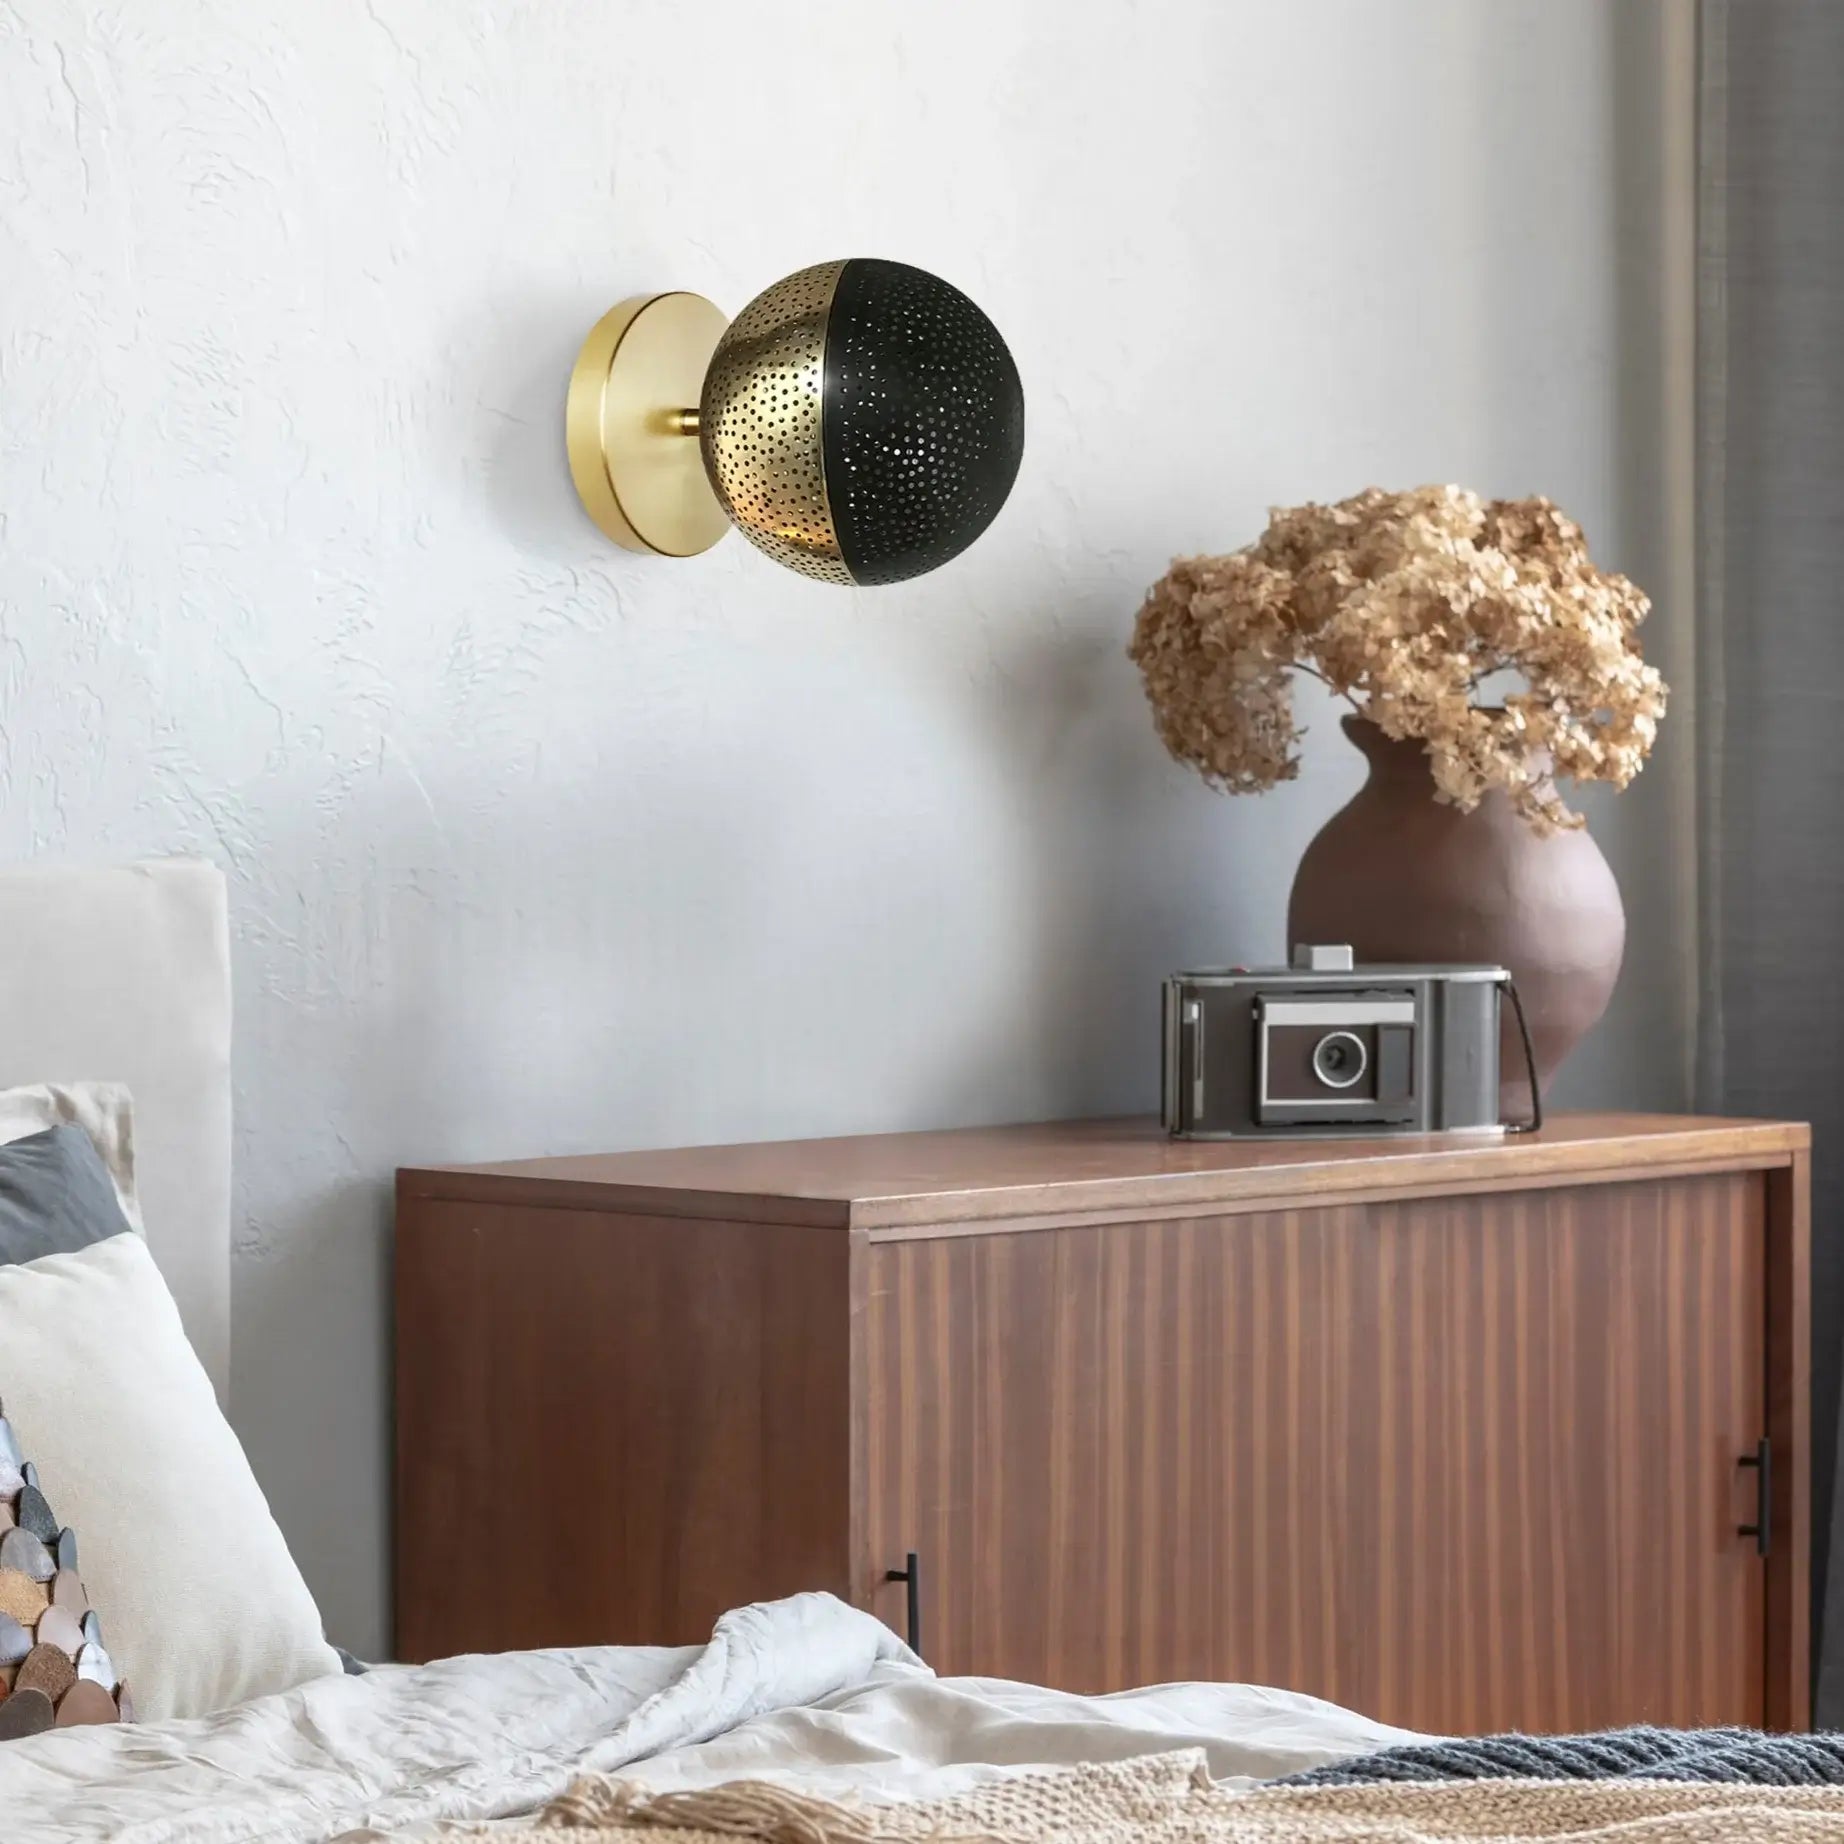 Dounia home Wall scone in Polished brass/black made of Metal, used as a bedroom lighting, Model: Kora